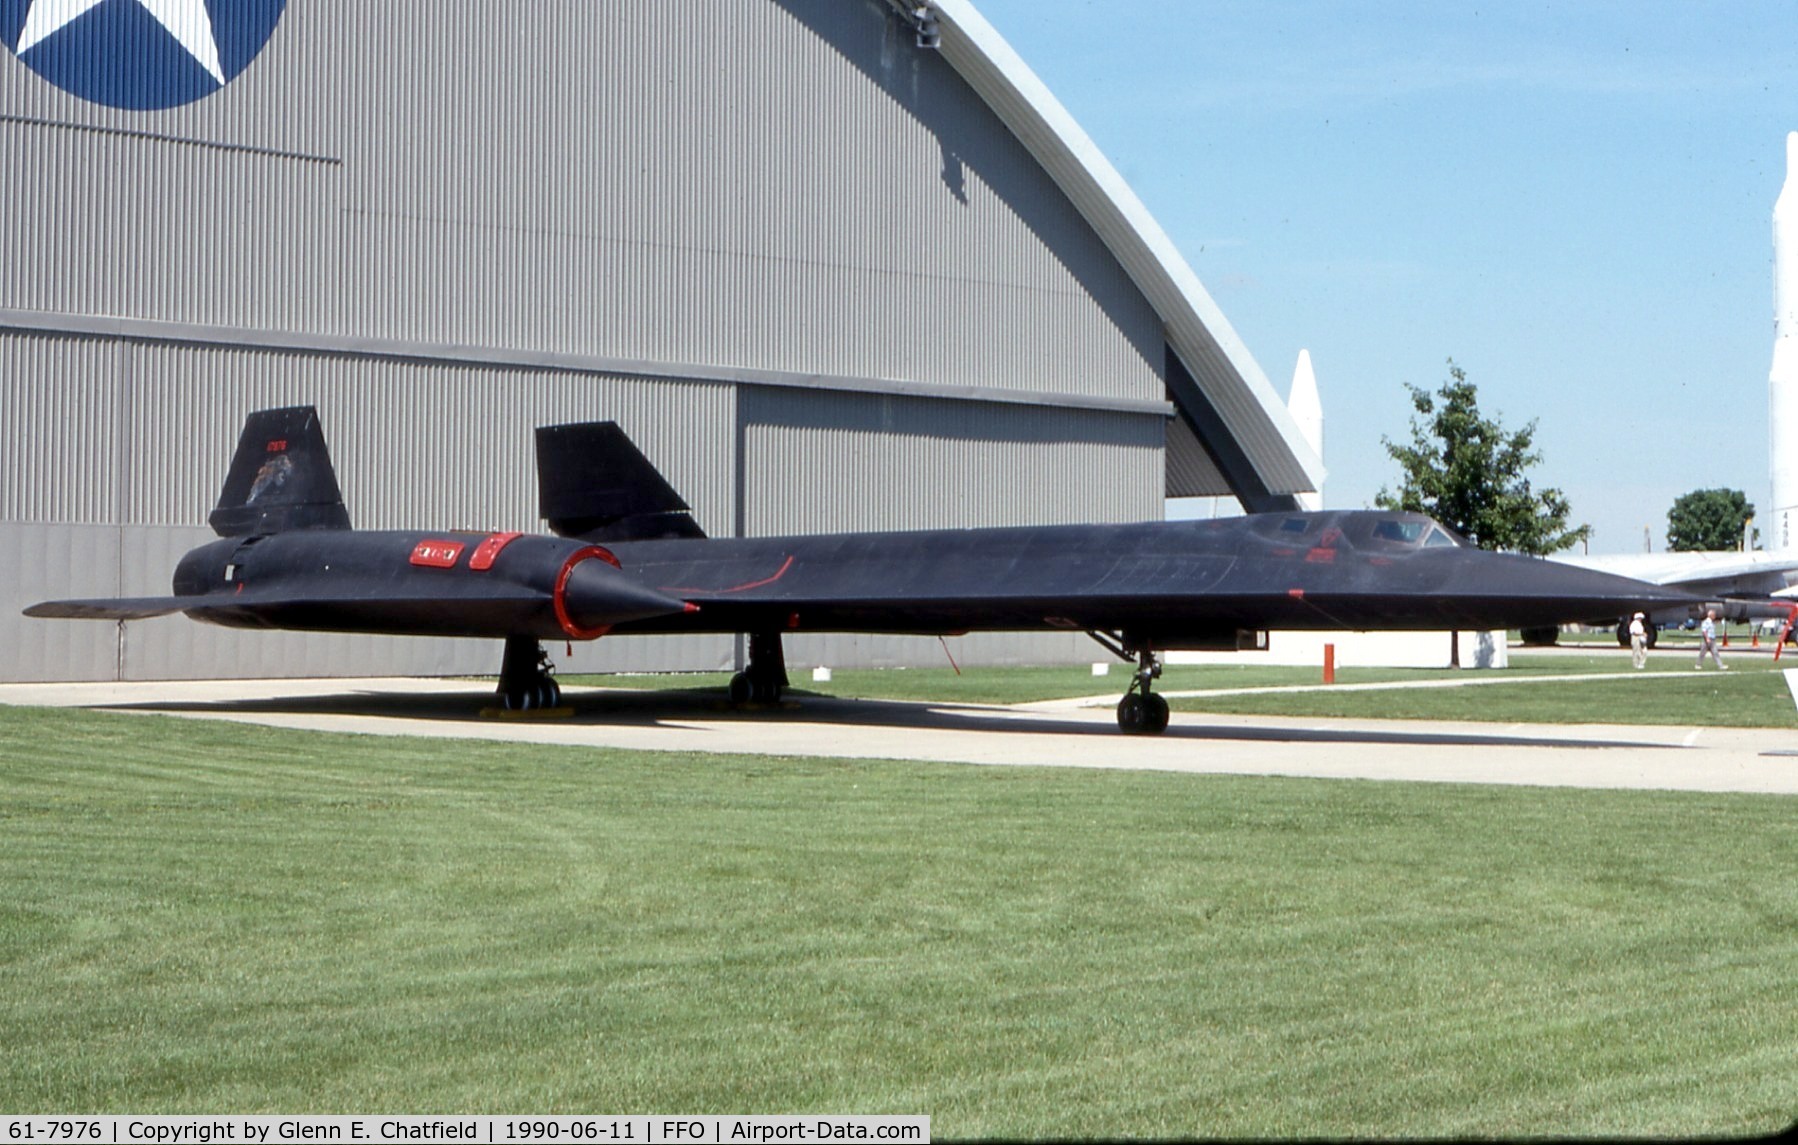 61-7976, 1961 Lockheed SR-71A Blackbird C/N 2027, SR-71A at the National Museum of the U.S. Air Force